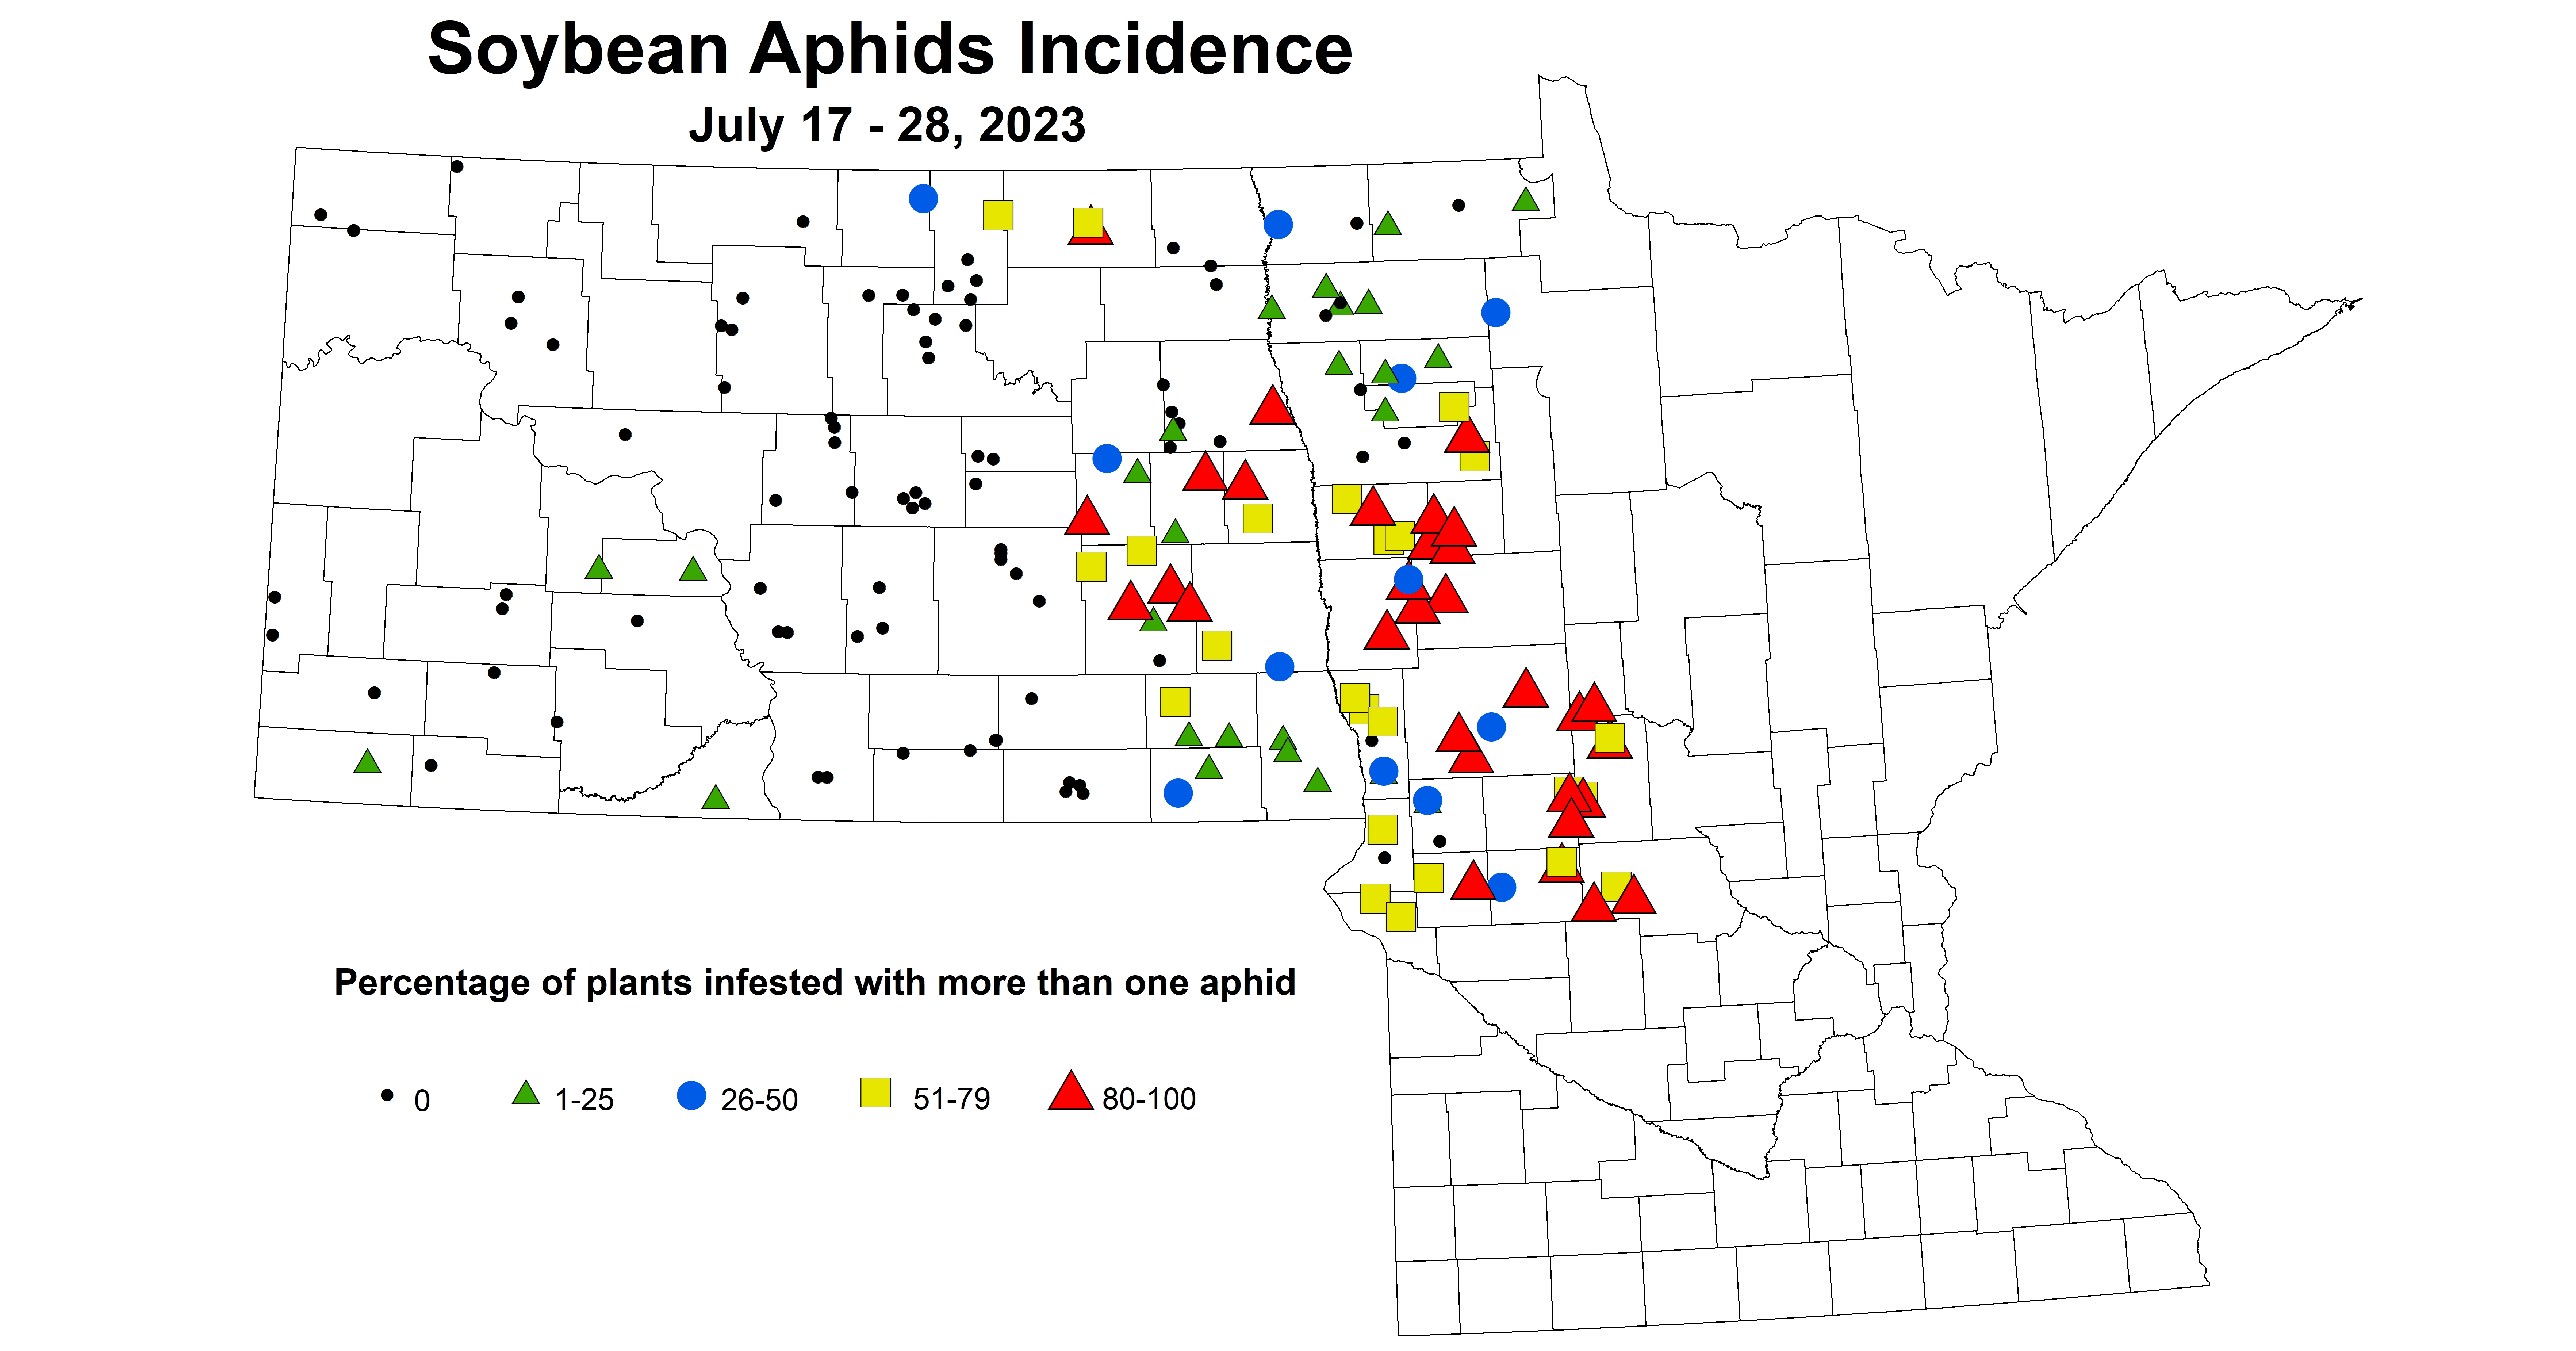 soybean aphids incidence July 17-28 2023